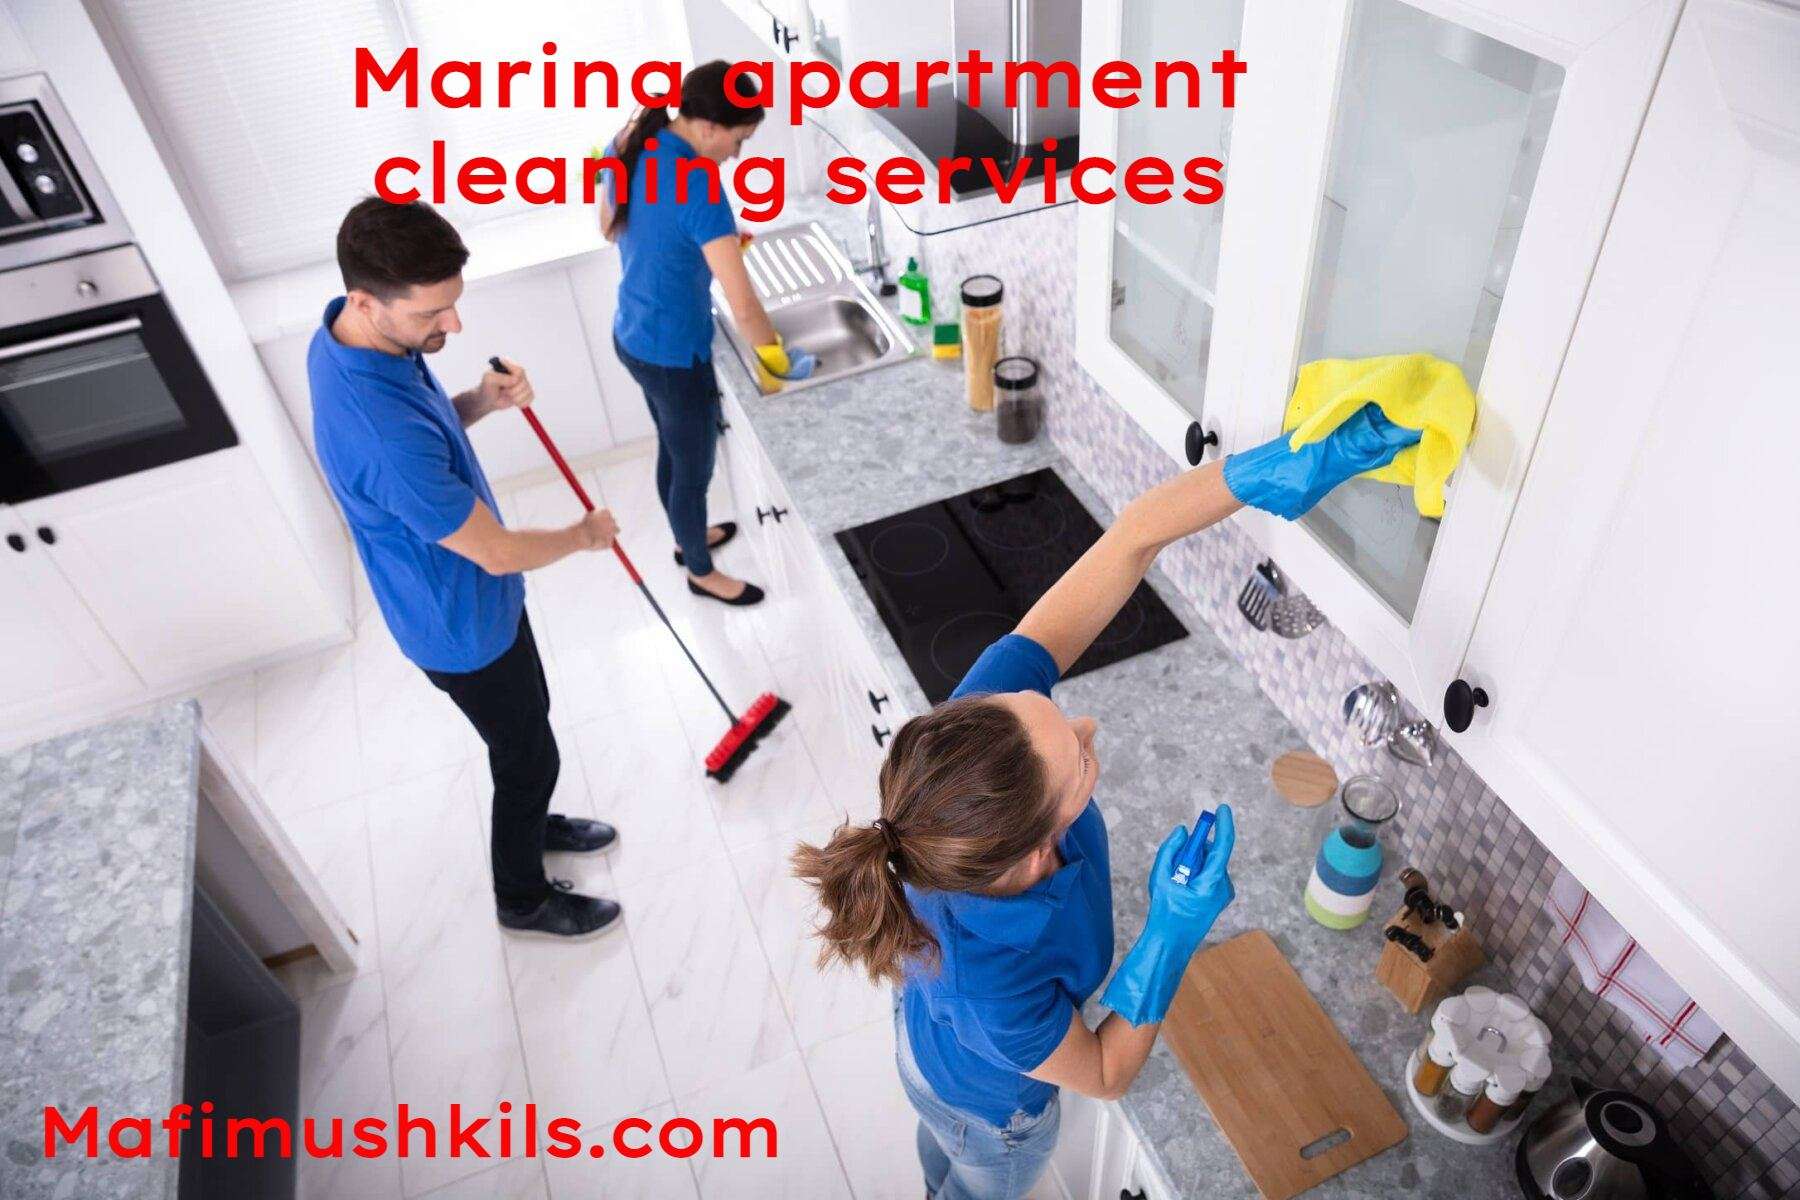 Marina apartment cleaning services